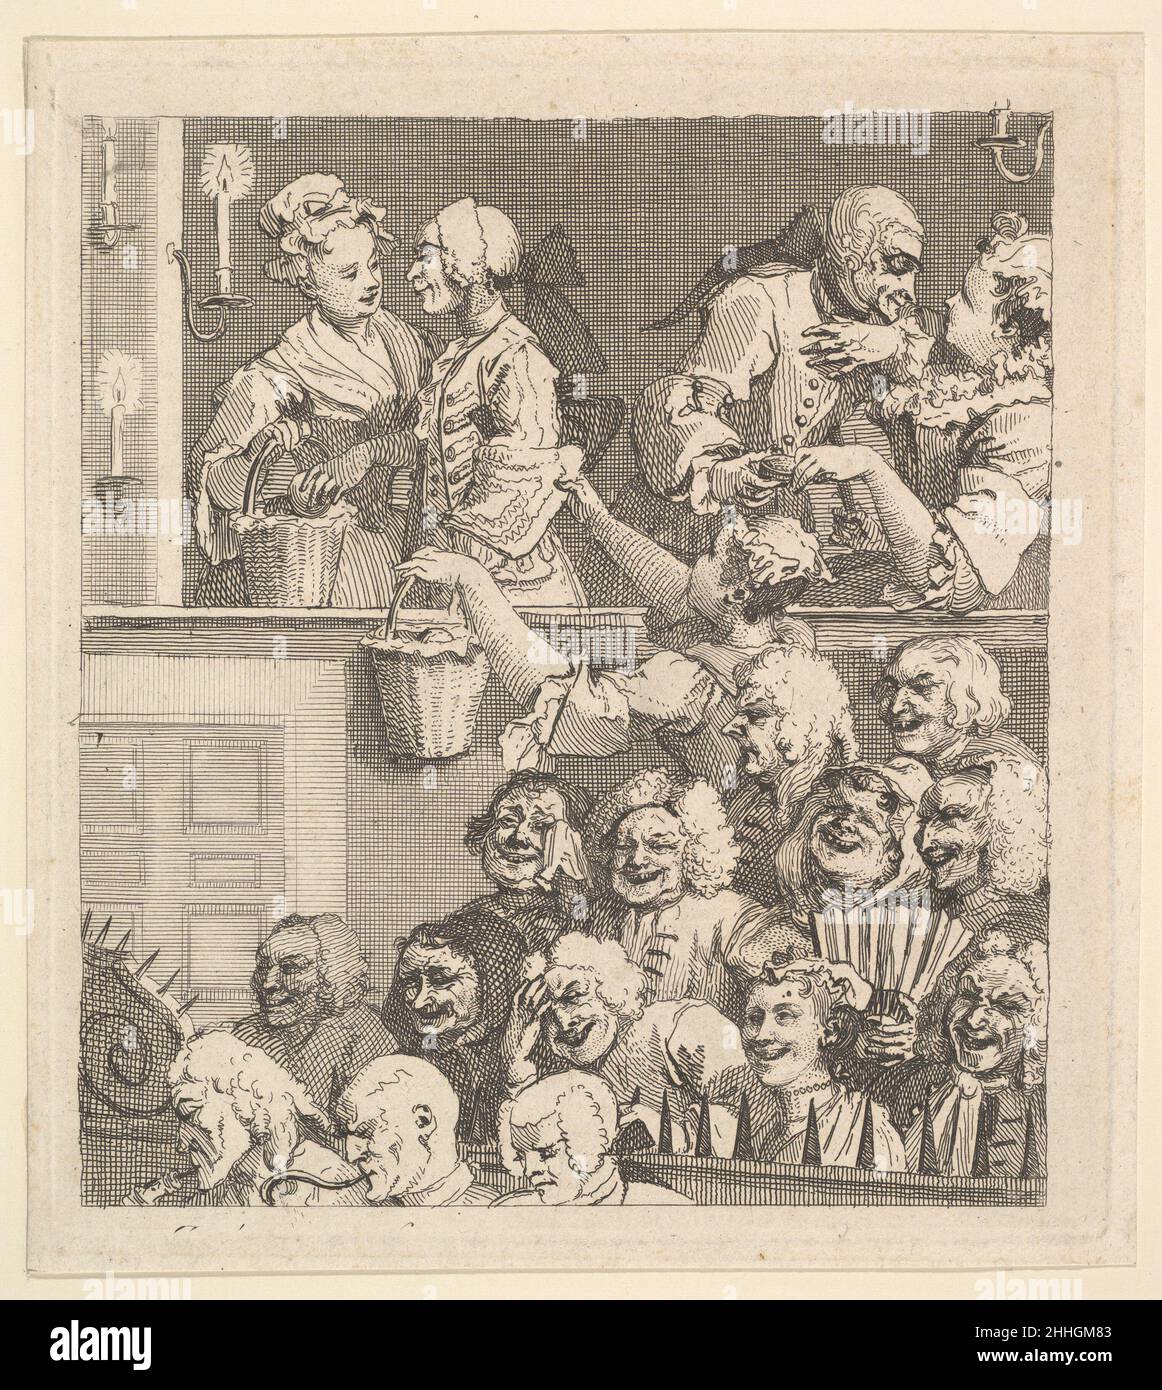 The Laughing Audience December 1733 William Hogarth British. The Laughing Audience  392608 Stock Photo